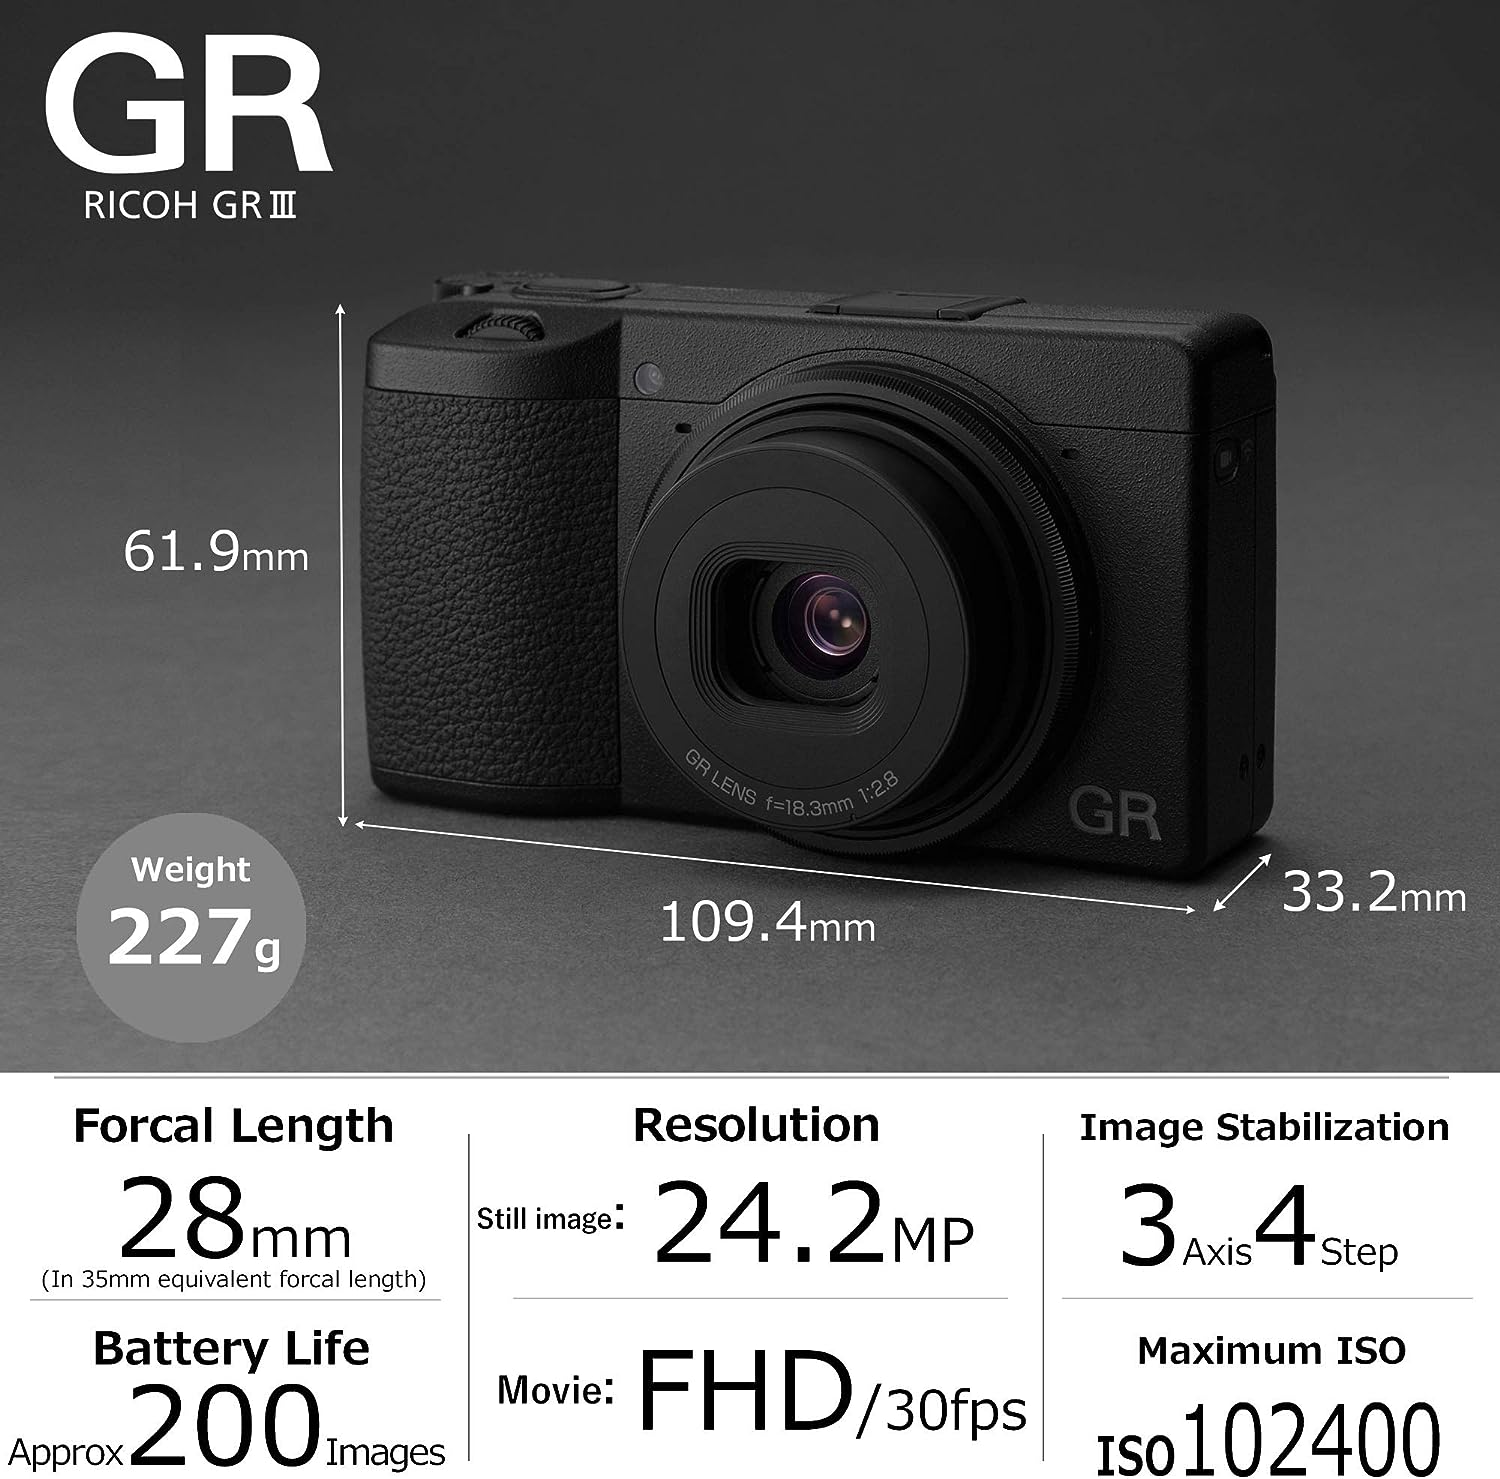 The gr roc g5 camera is shown on the screen.